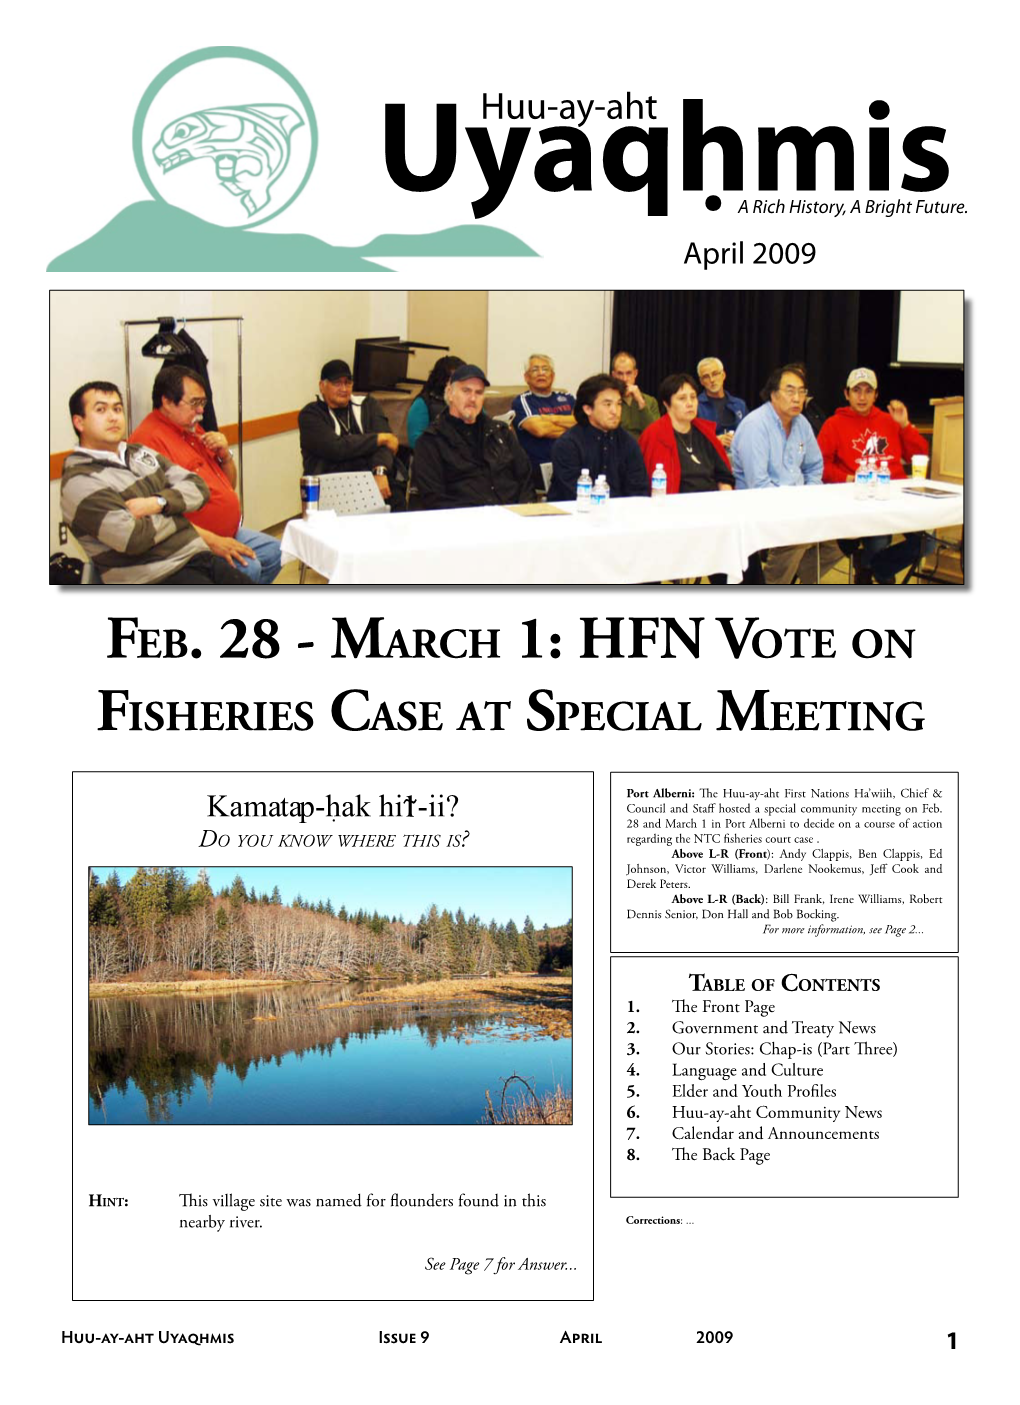 Feb. 28 and March 1 in Port Alberni to Decide on a Course of Action Do Y O U K N O W W H E R E T H I S I S ? Regarding the NTC Fisheries Court Case